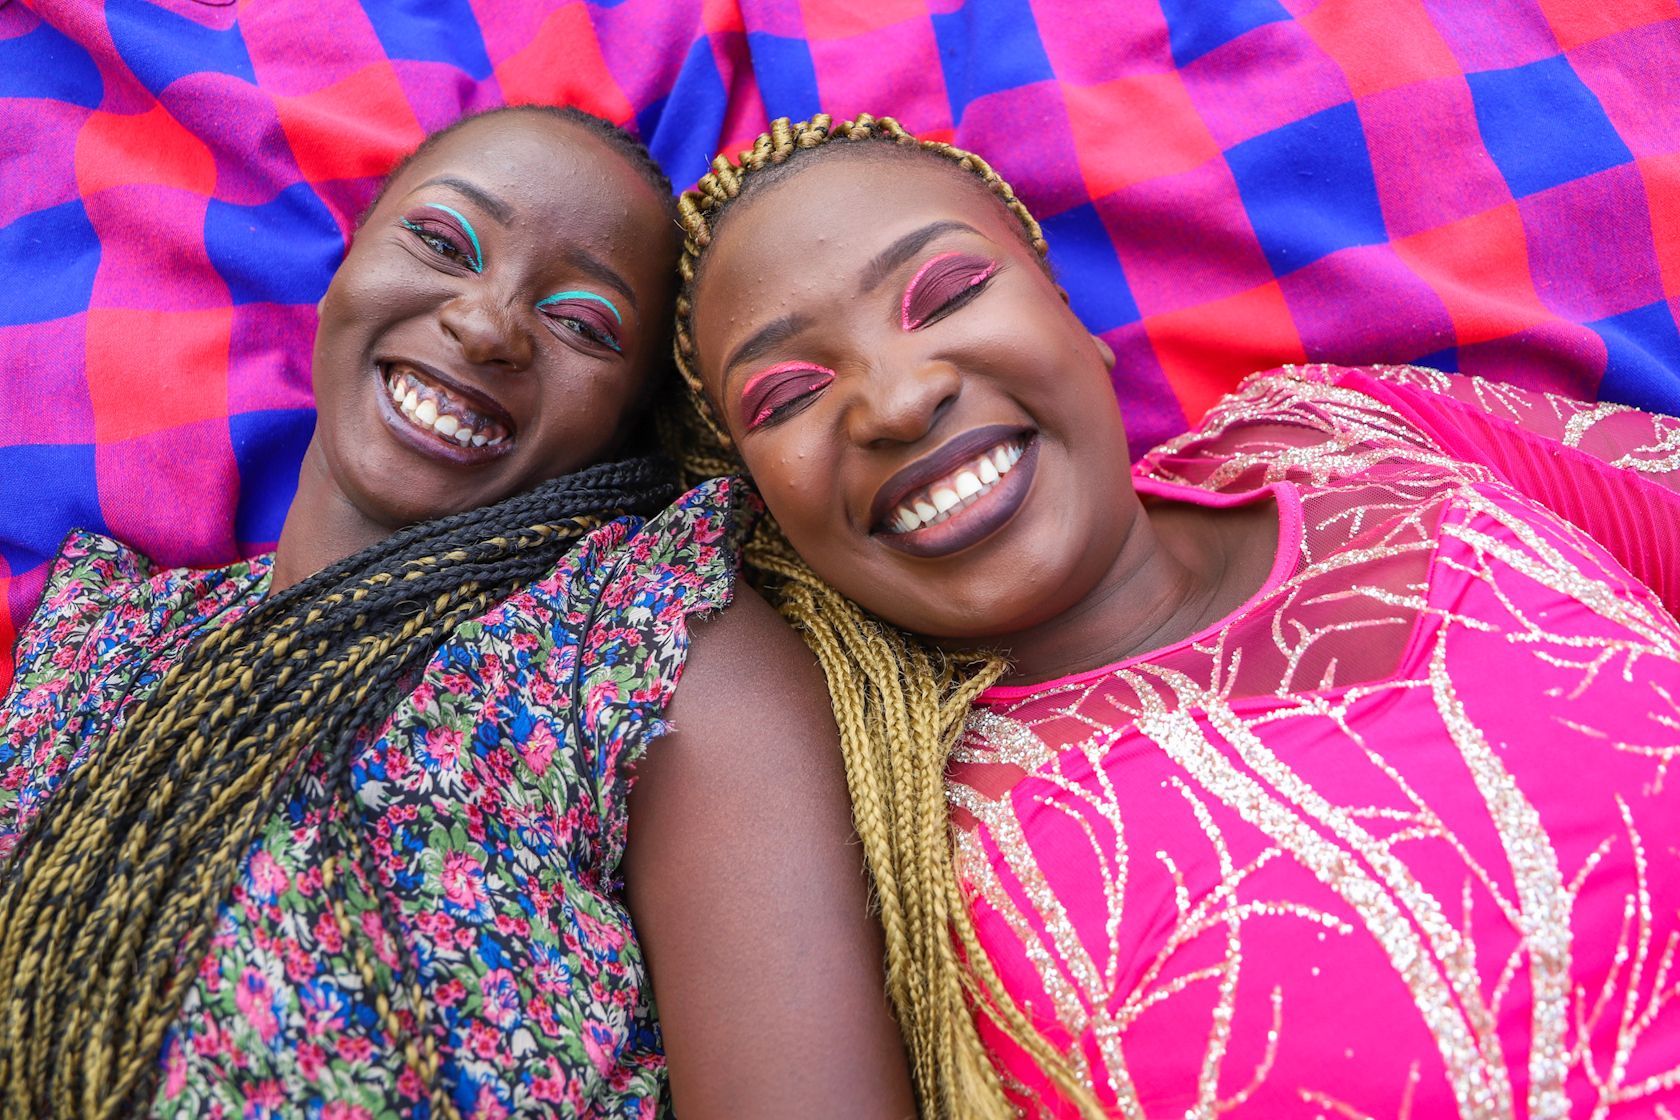 photo of two smiling women wearing colorful clothing-1